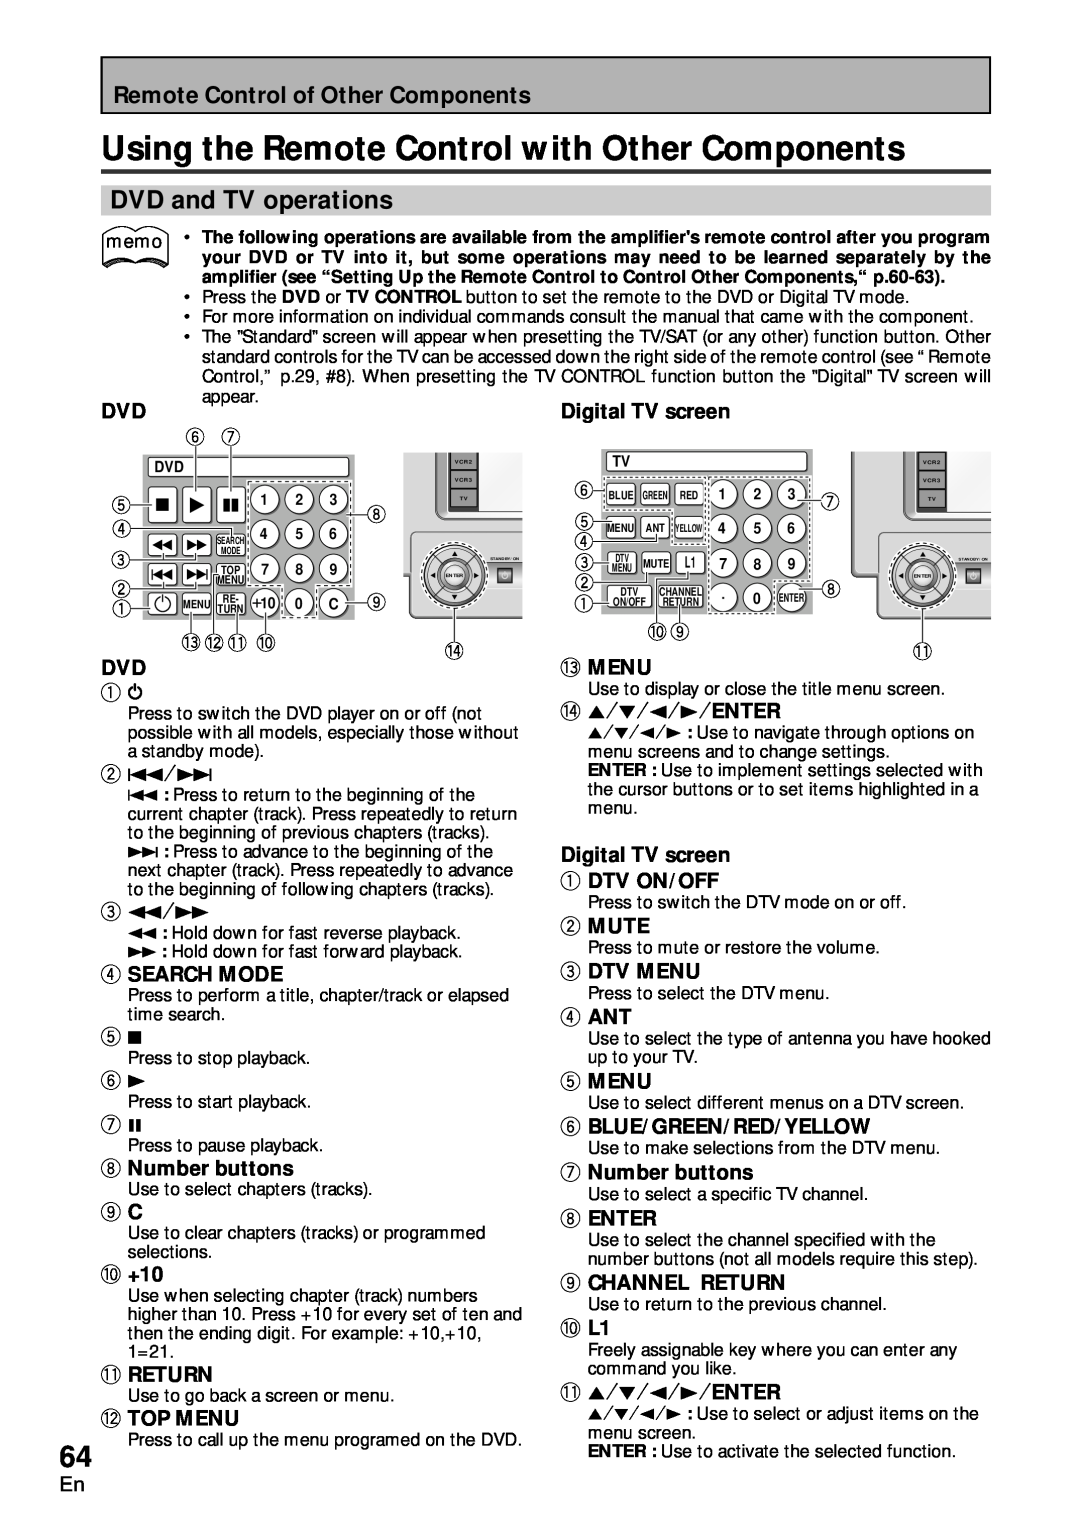 Pioneer VSA-AX10 operating instructions Using the Remote Control with Other Components, DVD and TV operations 